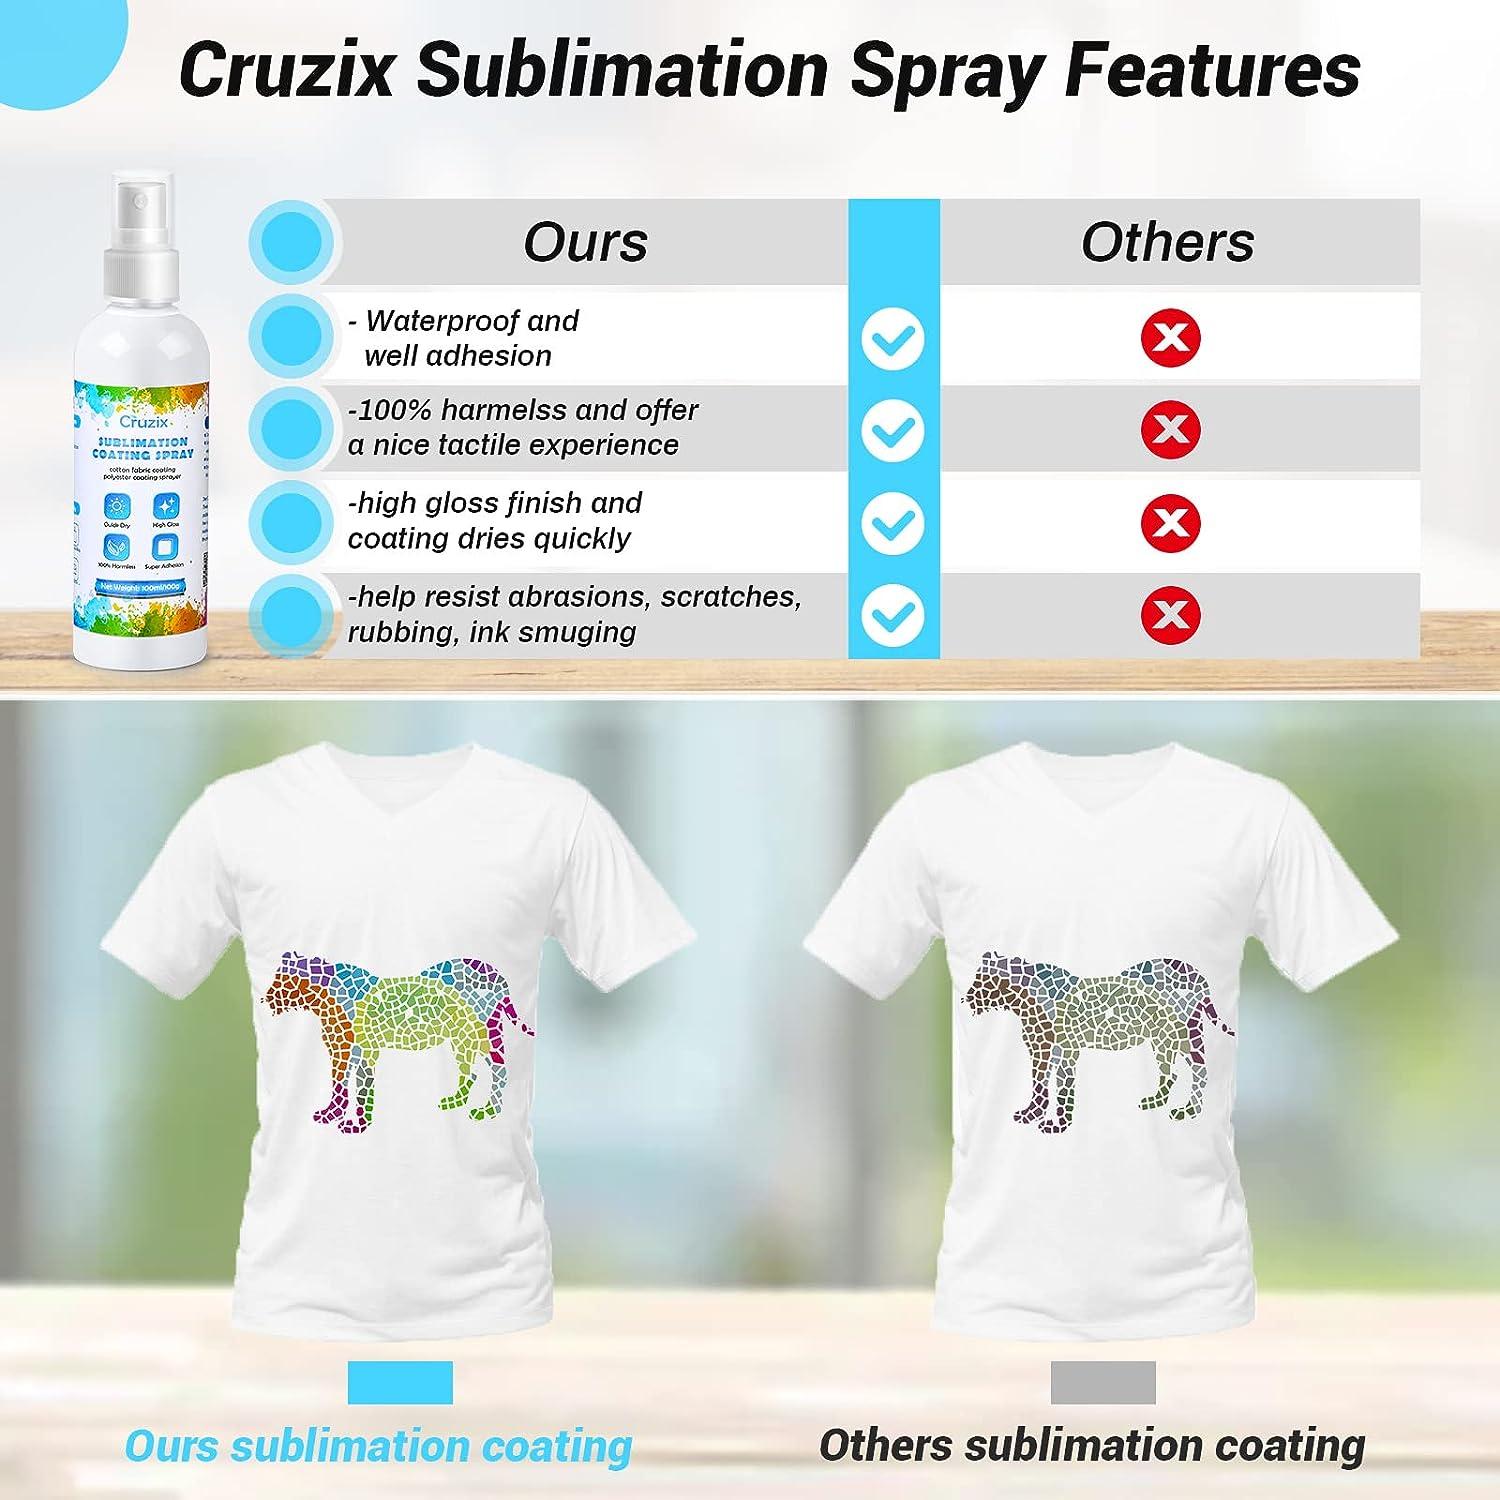 Sublimation Spray for Cotton, Sublimation Coating Spray, Quick Dry & Super  Adhesion, High Gloss Sublimation Coating Supplies for All Fabric Polyester